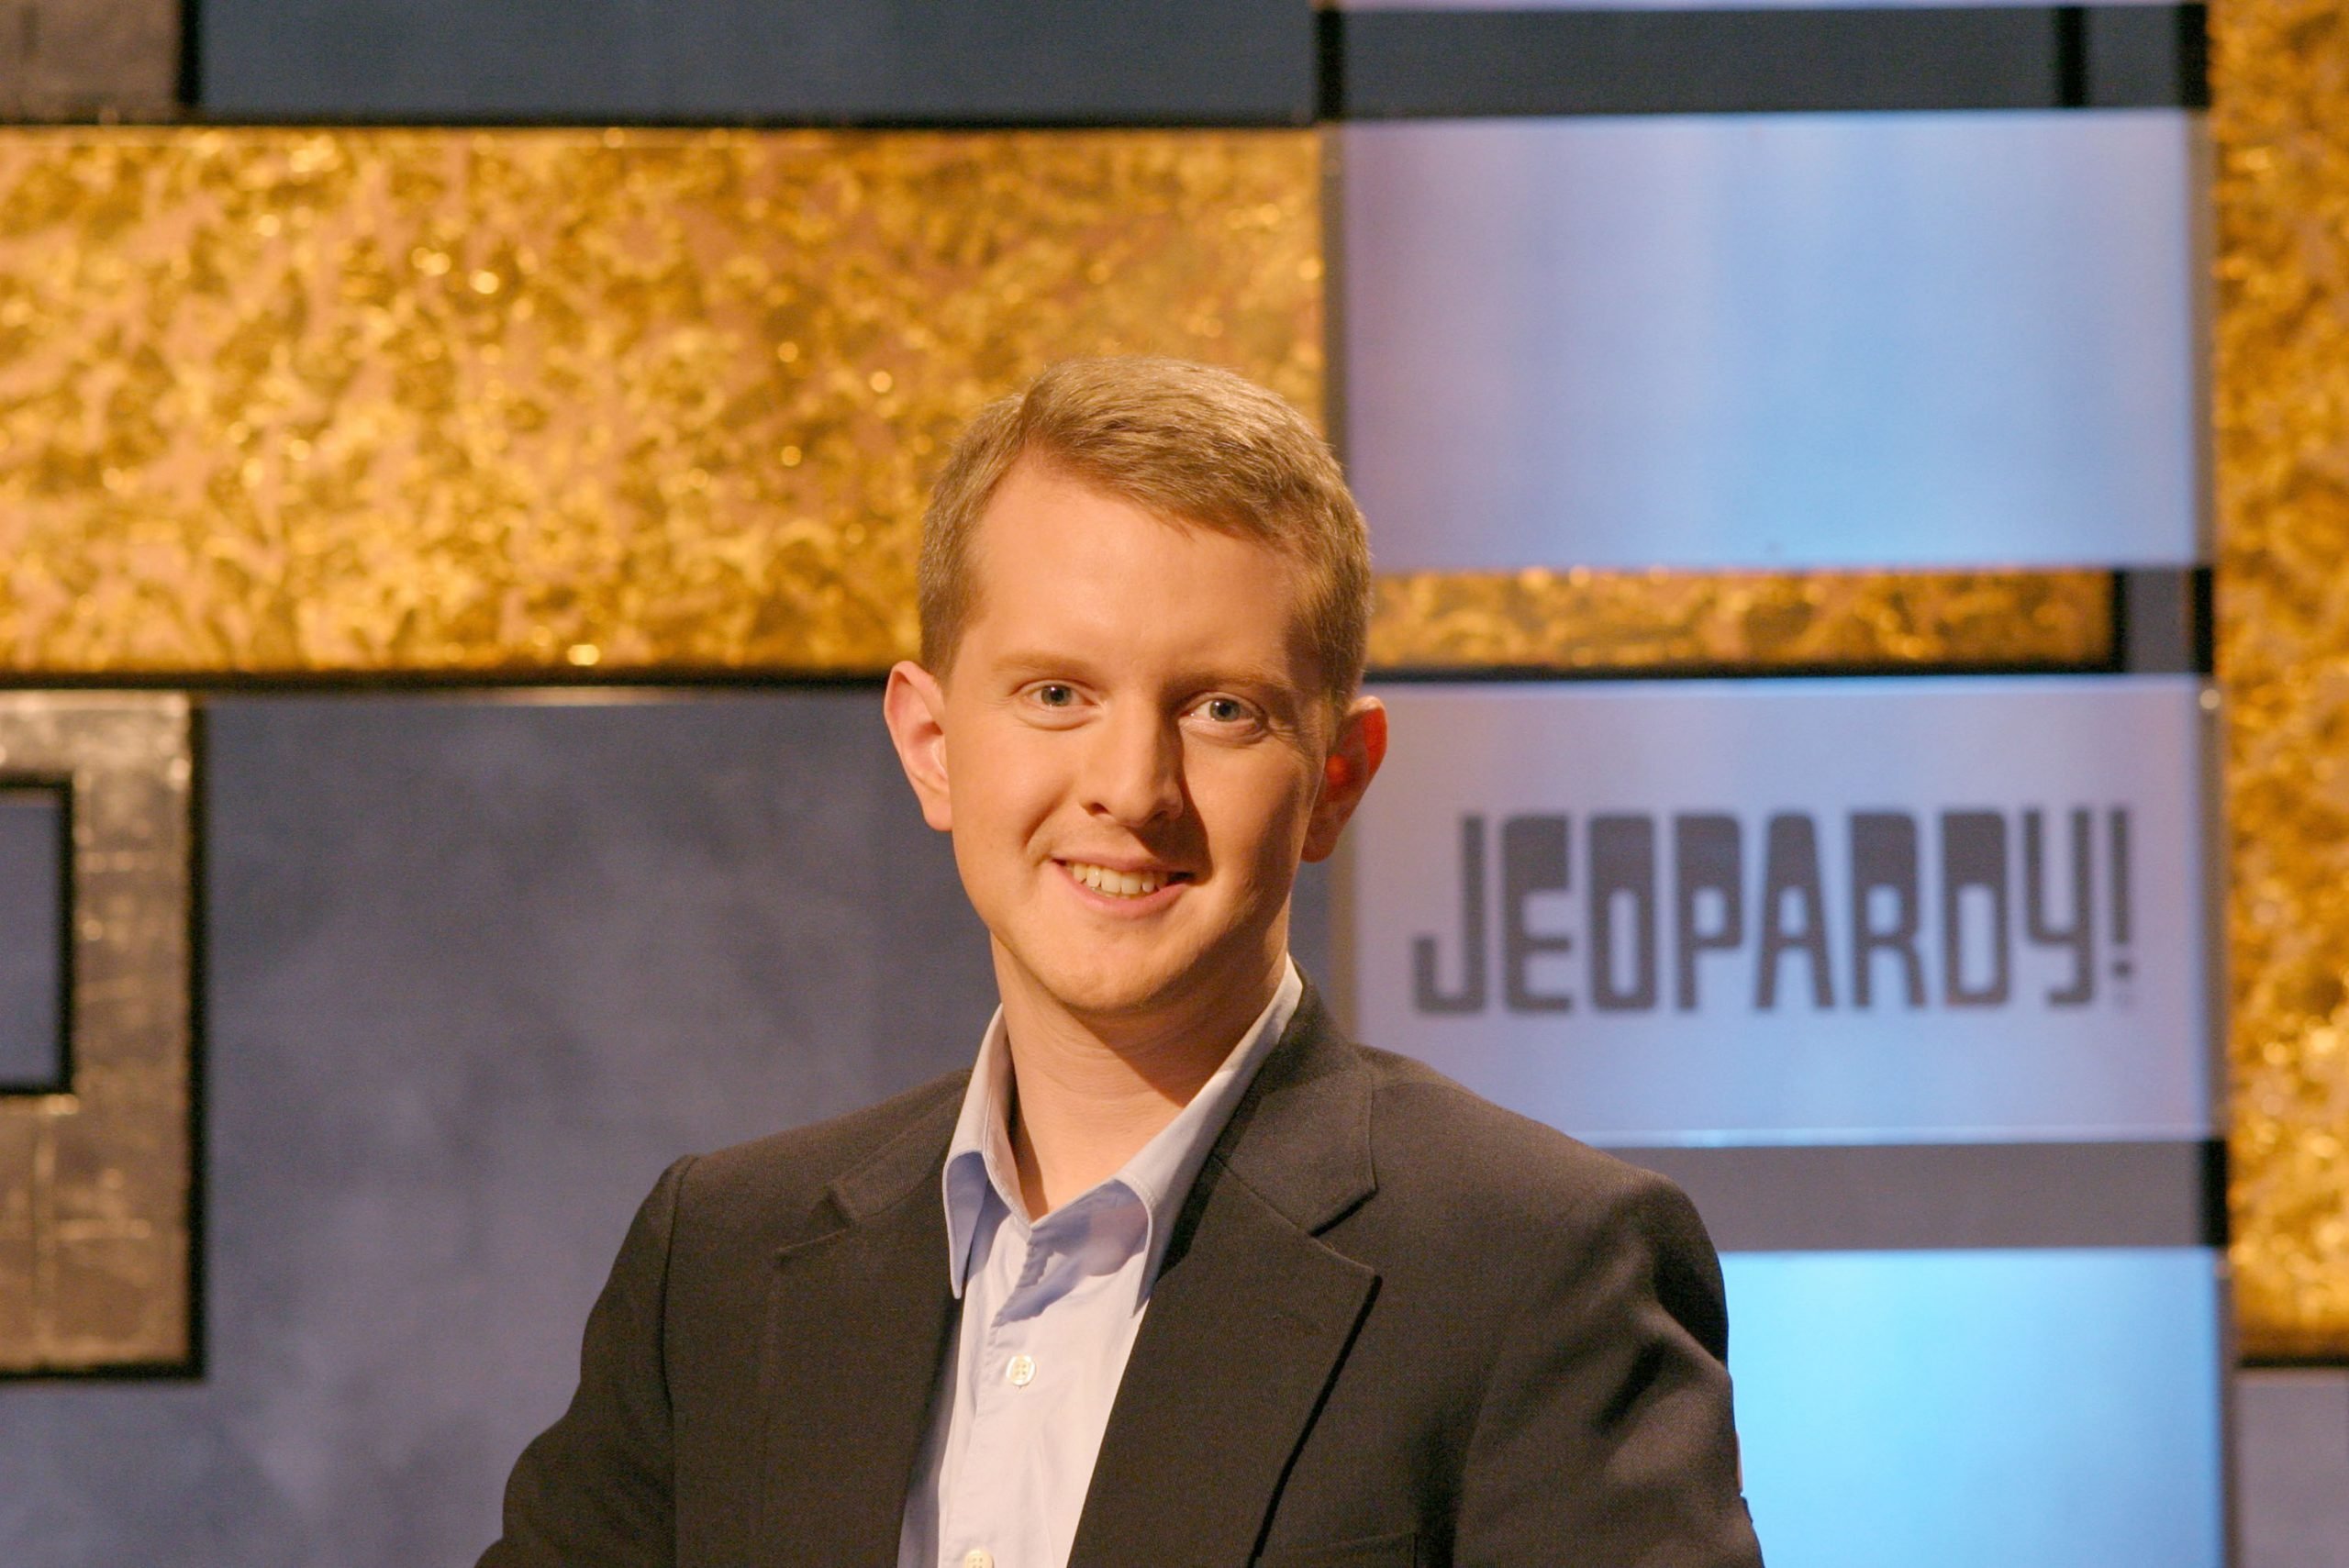 'Jeopardy!'s greatest player of all time Ken Jennings